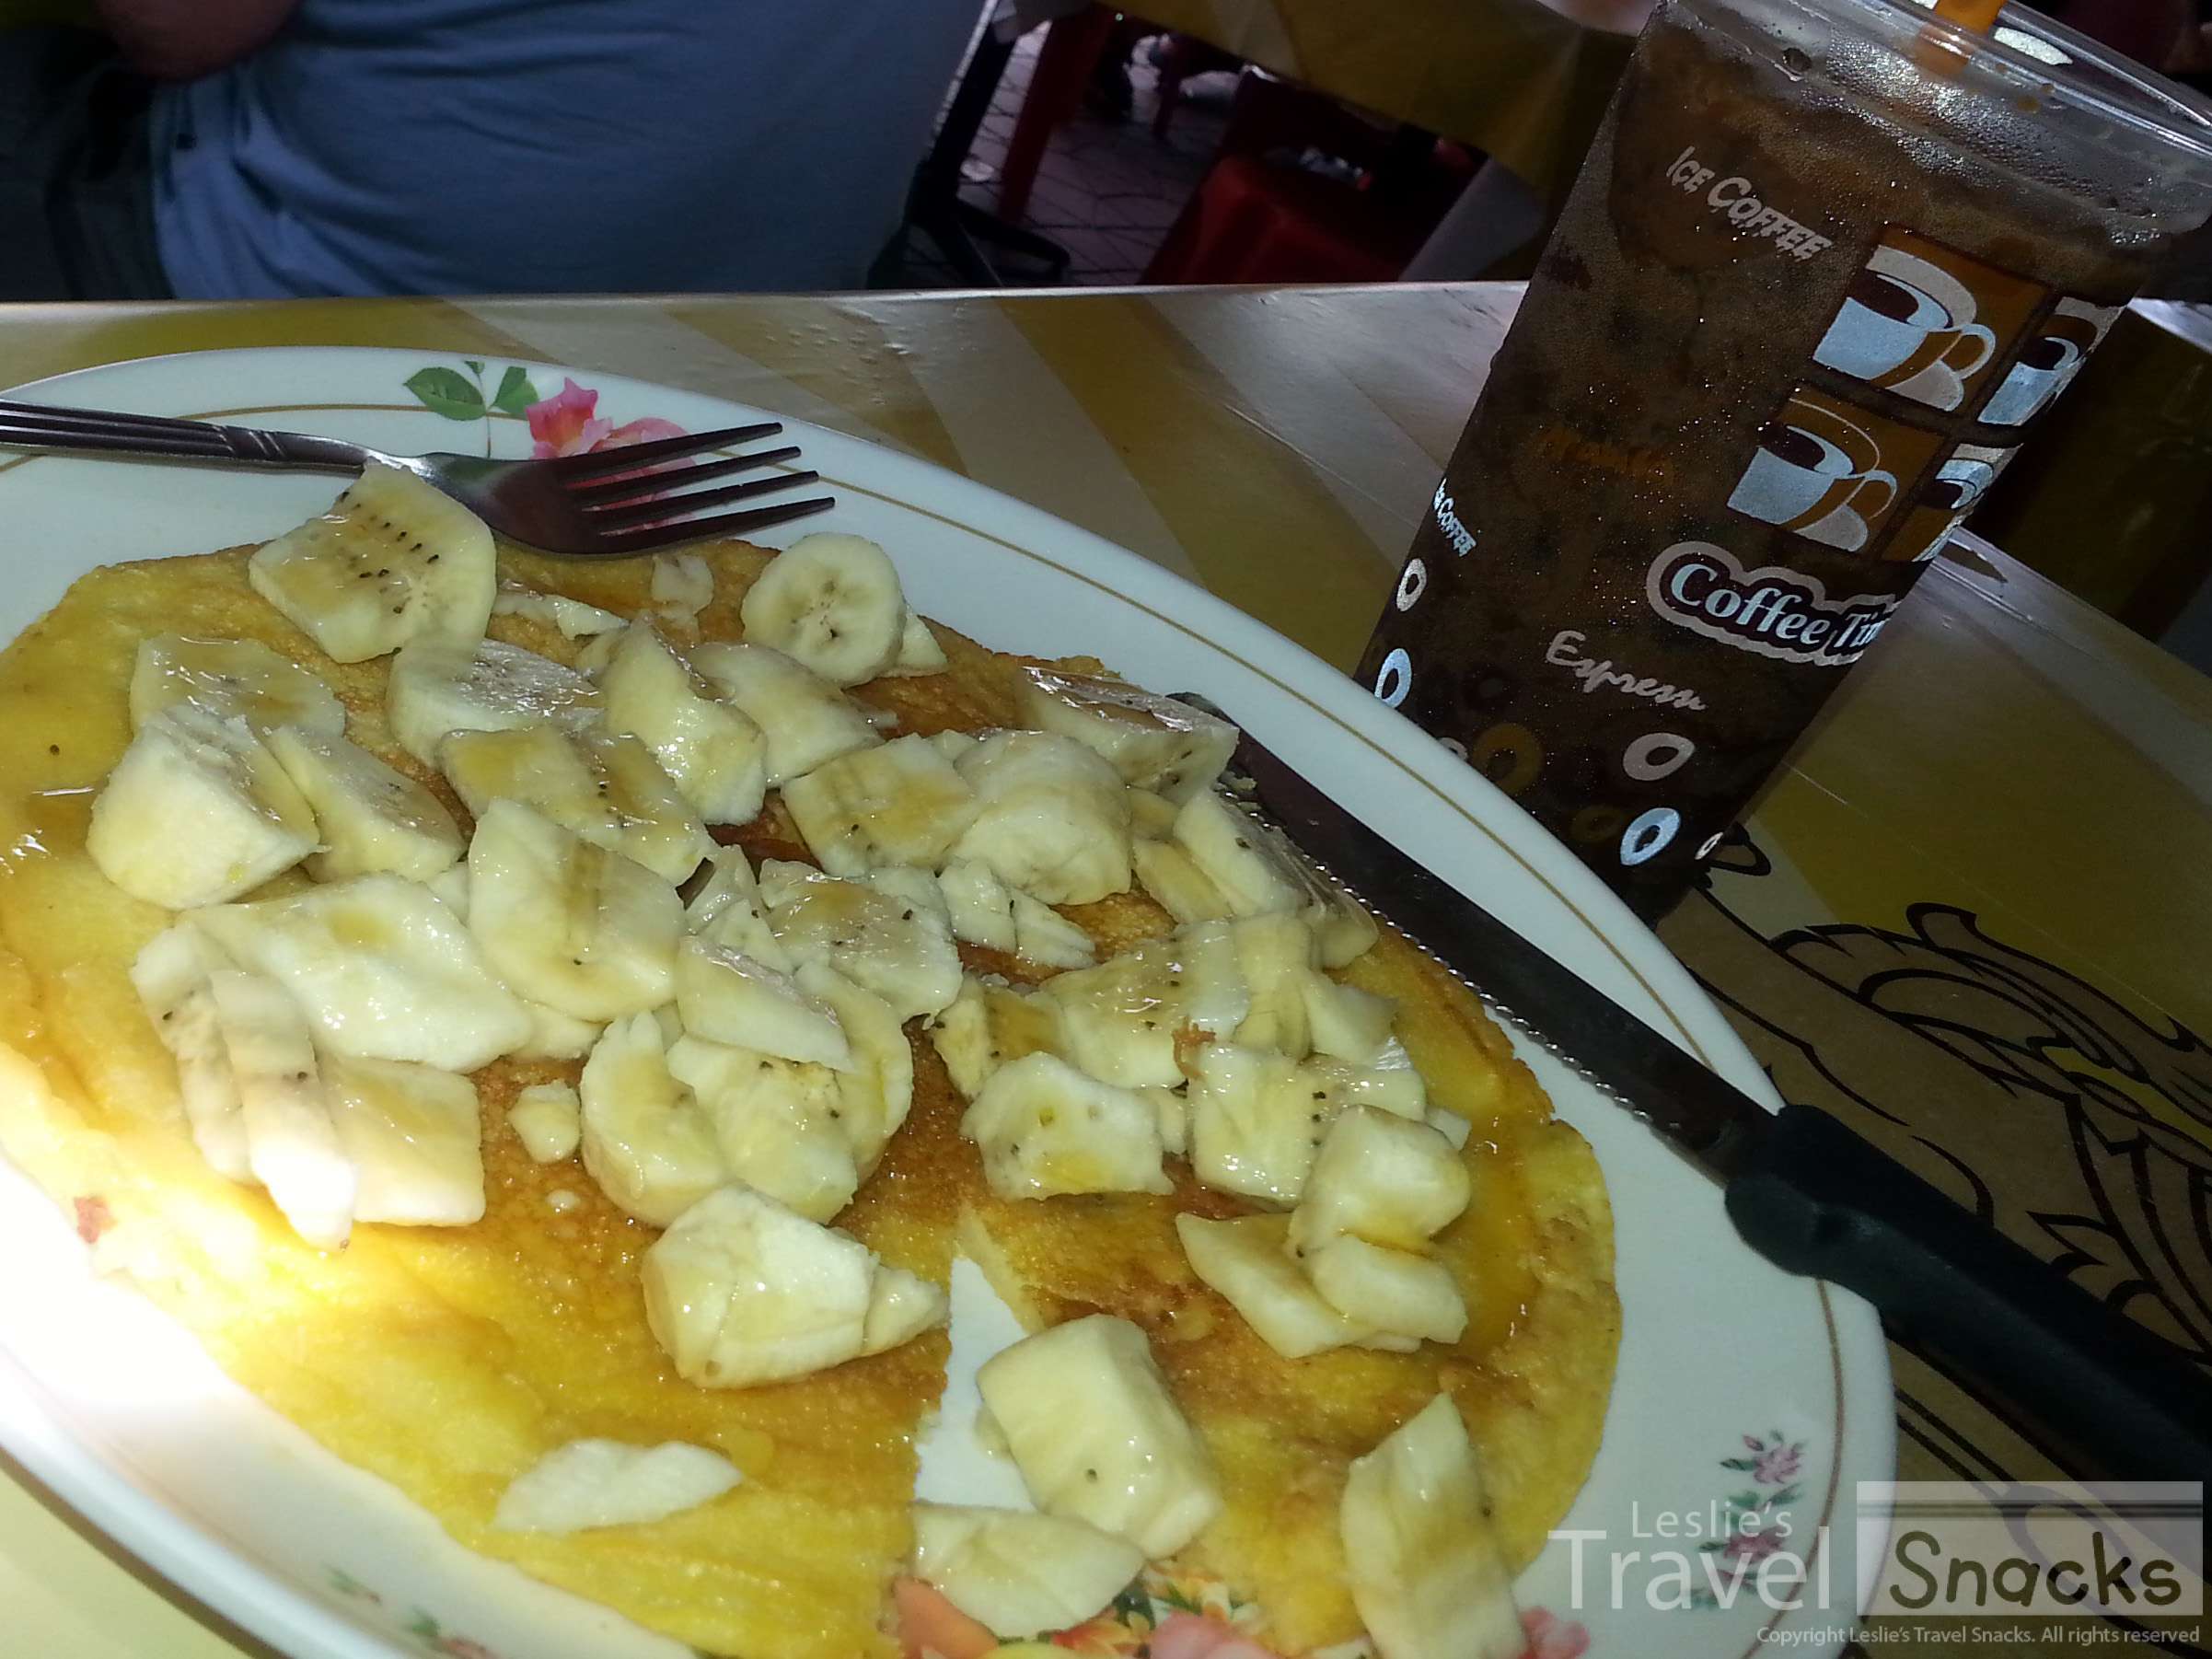 For some reason, banana pancakes are what have become the traveler's staple. You'll find it in many tourist areas around the world.